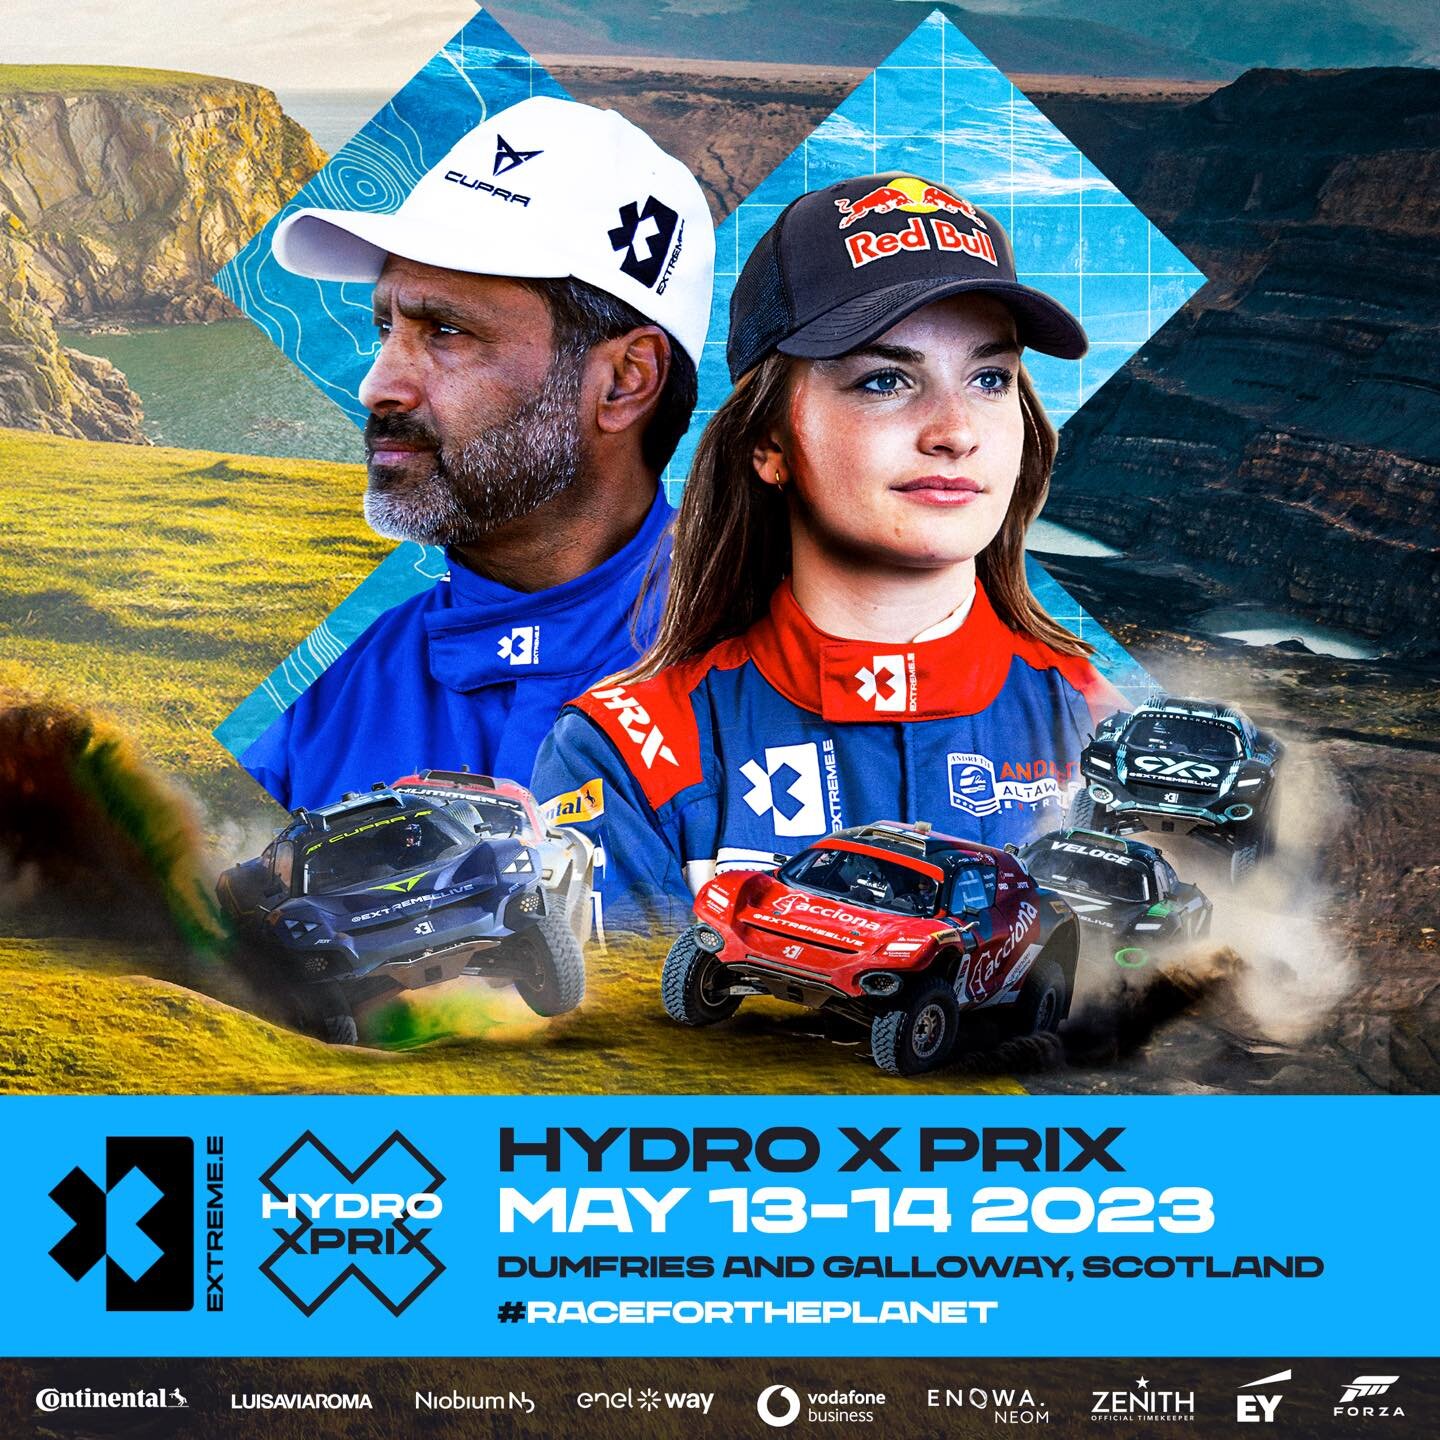 The countdown is on! ONE MONTH to go!⏱️

Join us for the Hydro x Prix ⚡️

📆 13-14 May
📍 Scotland 

@jensonbutton @heddahosaas @jbxeracing @extremeelive @earnt_ @sparco_official @heikkikovalainen
&mdash;

#extremee #extremeelive #JBXE #JBXERacing #j